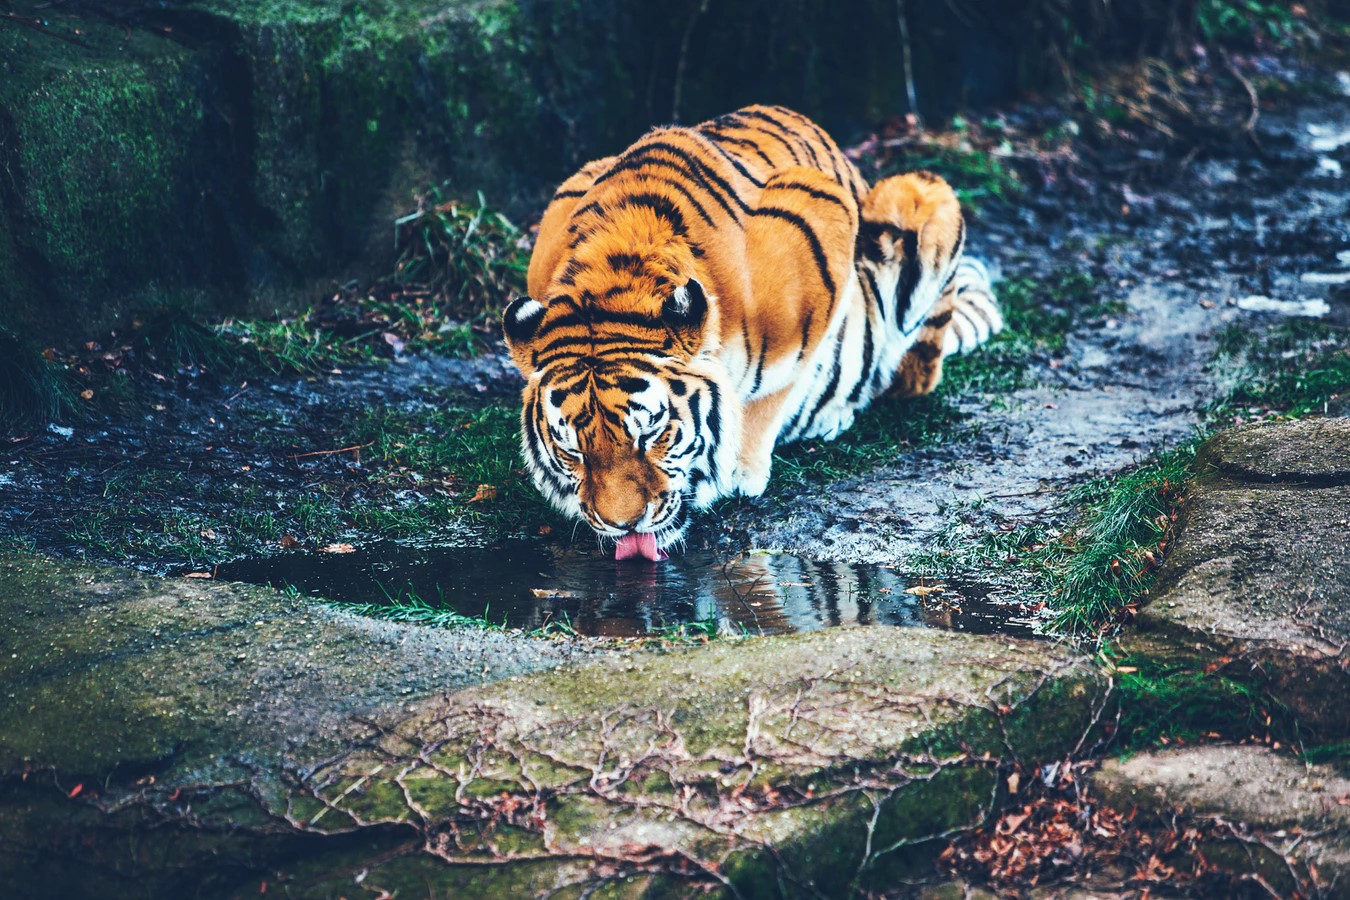 Tiger lapping up water on world wildlife day